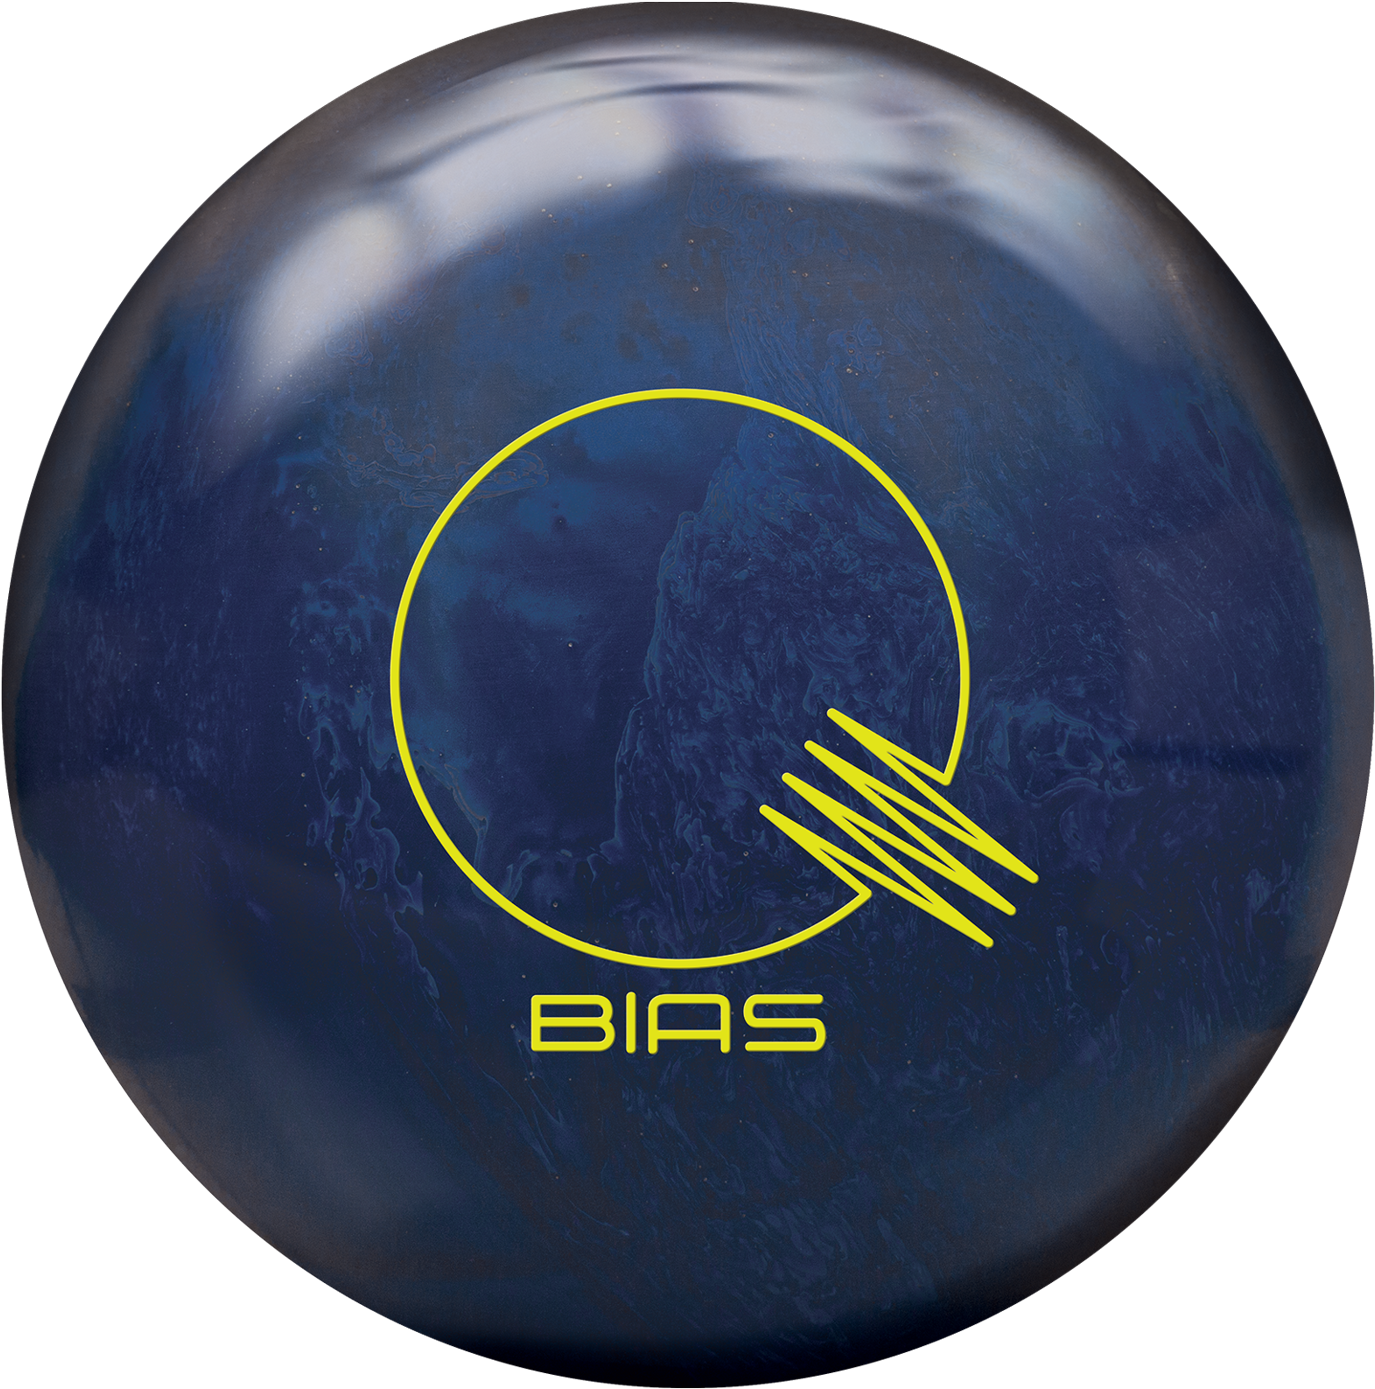 A Blue Bowling Ball With Yellow Circle And Text